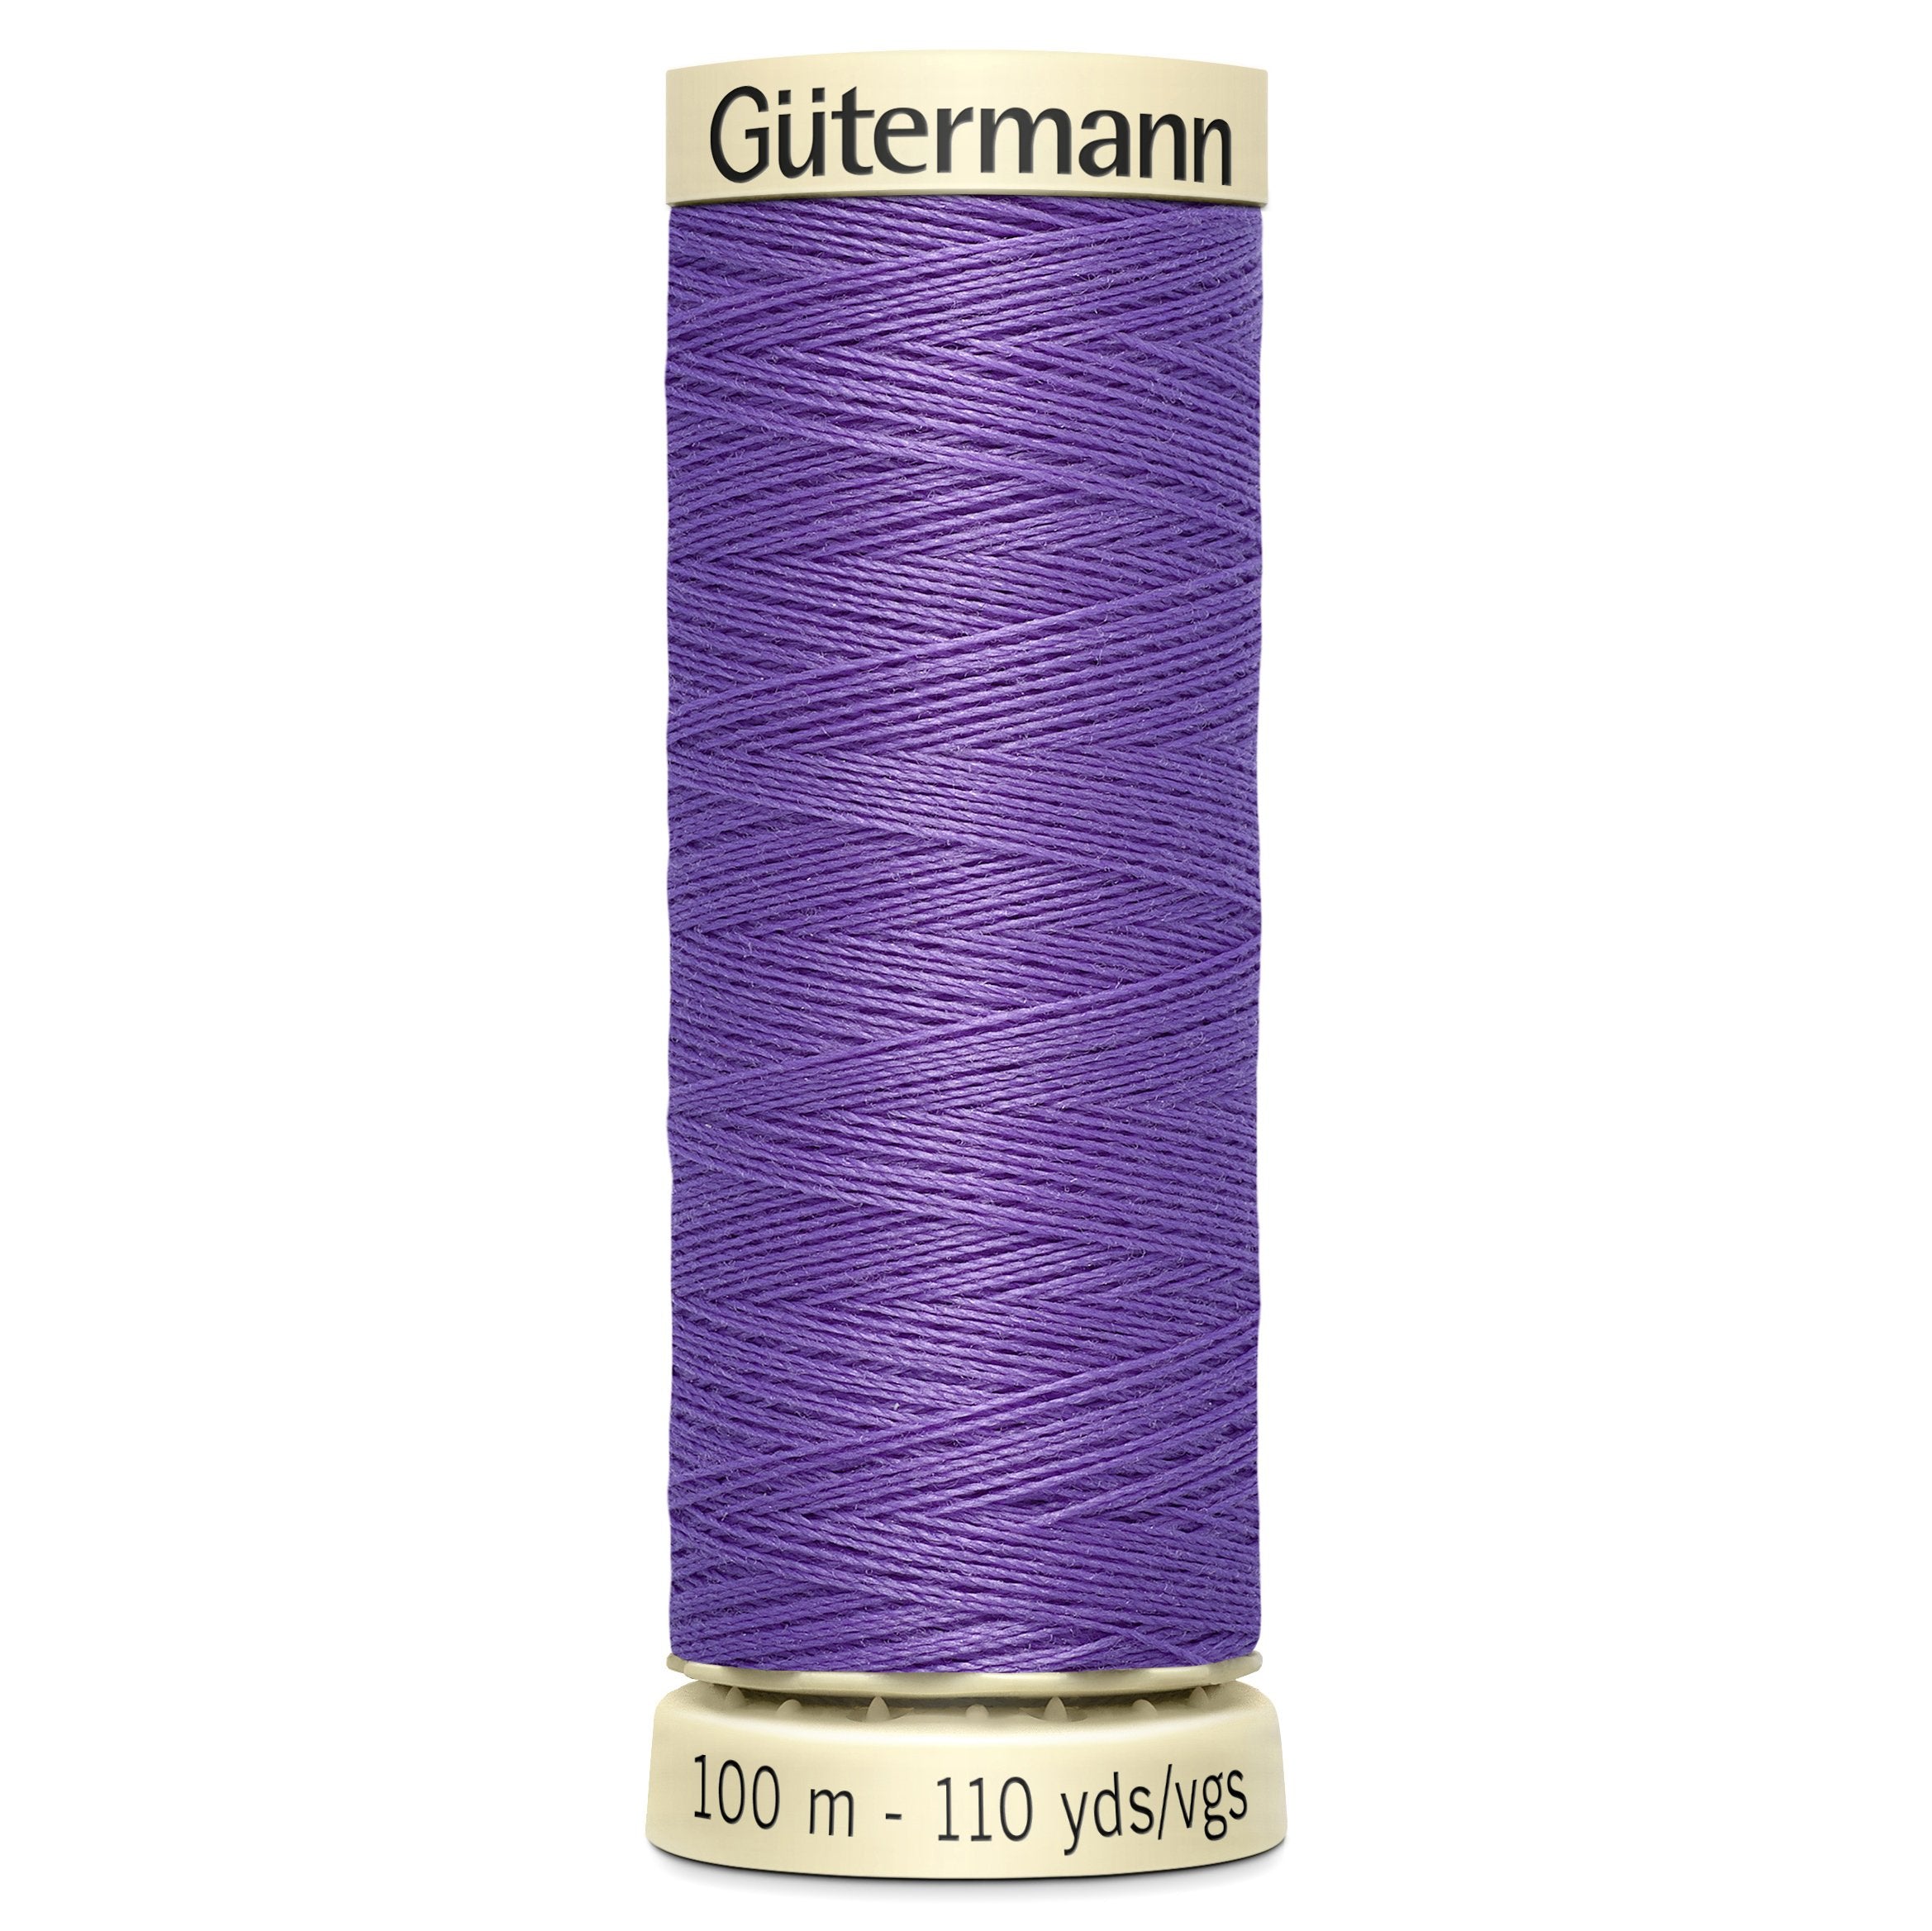 Gutermann Sew All Thread colour 391 Lilac from Jaycotts Sewing Supplies